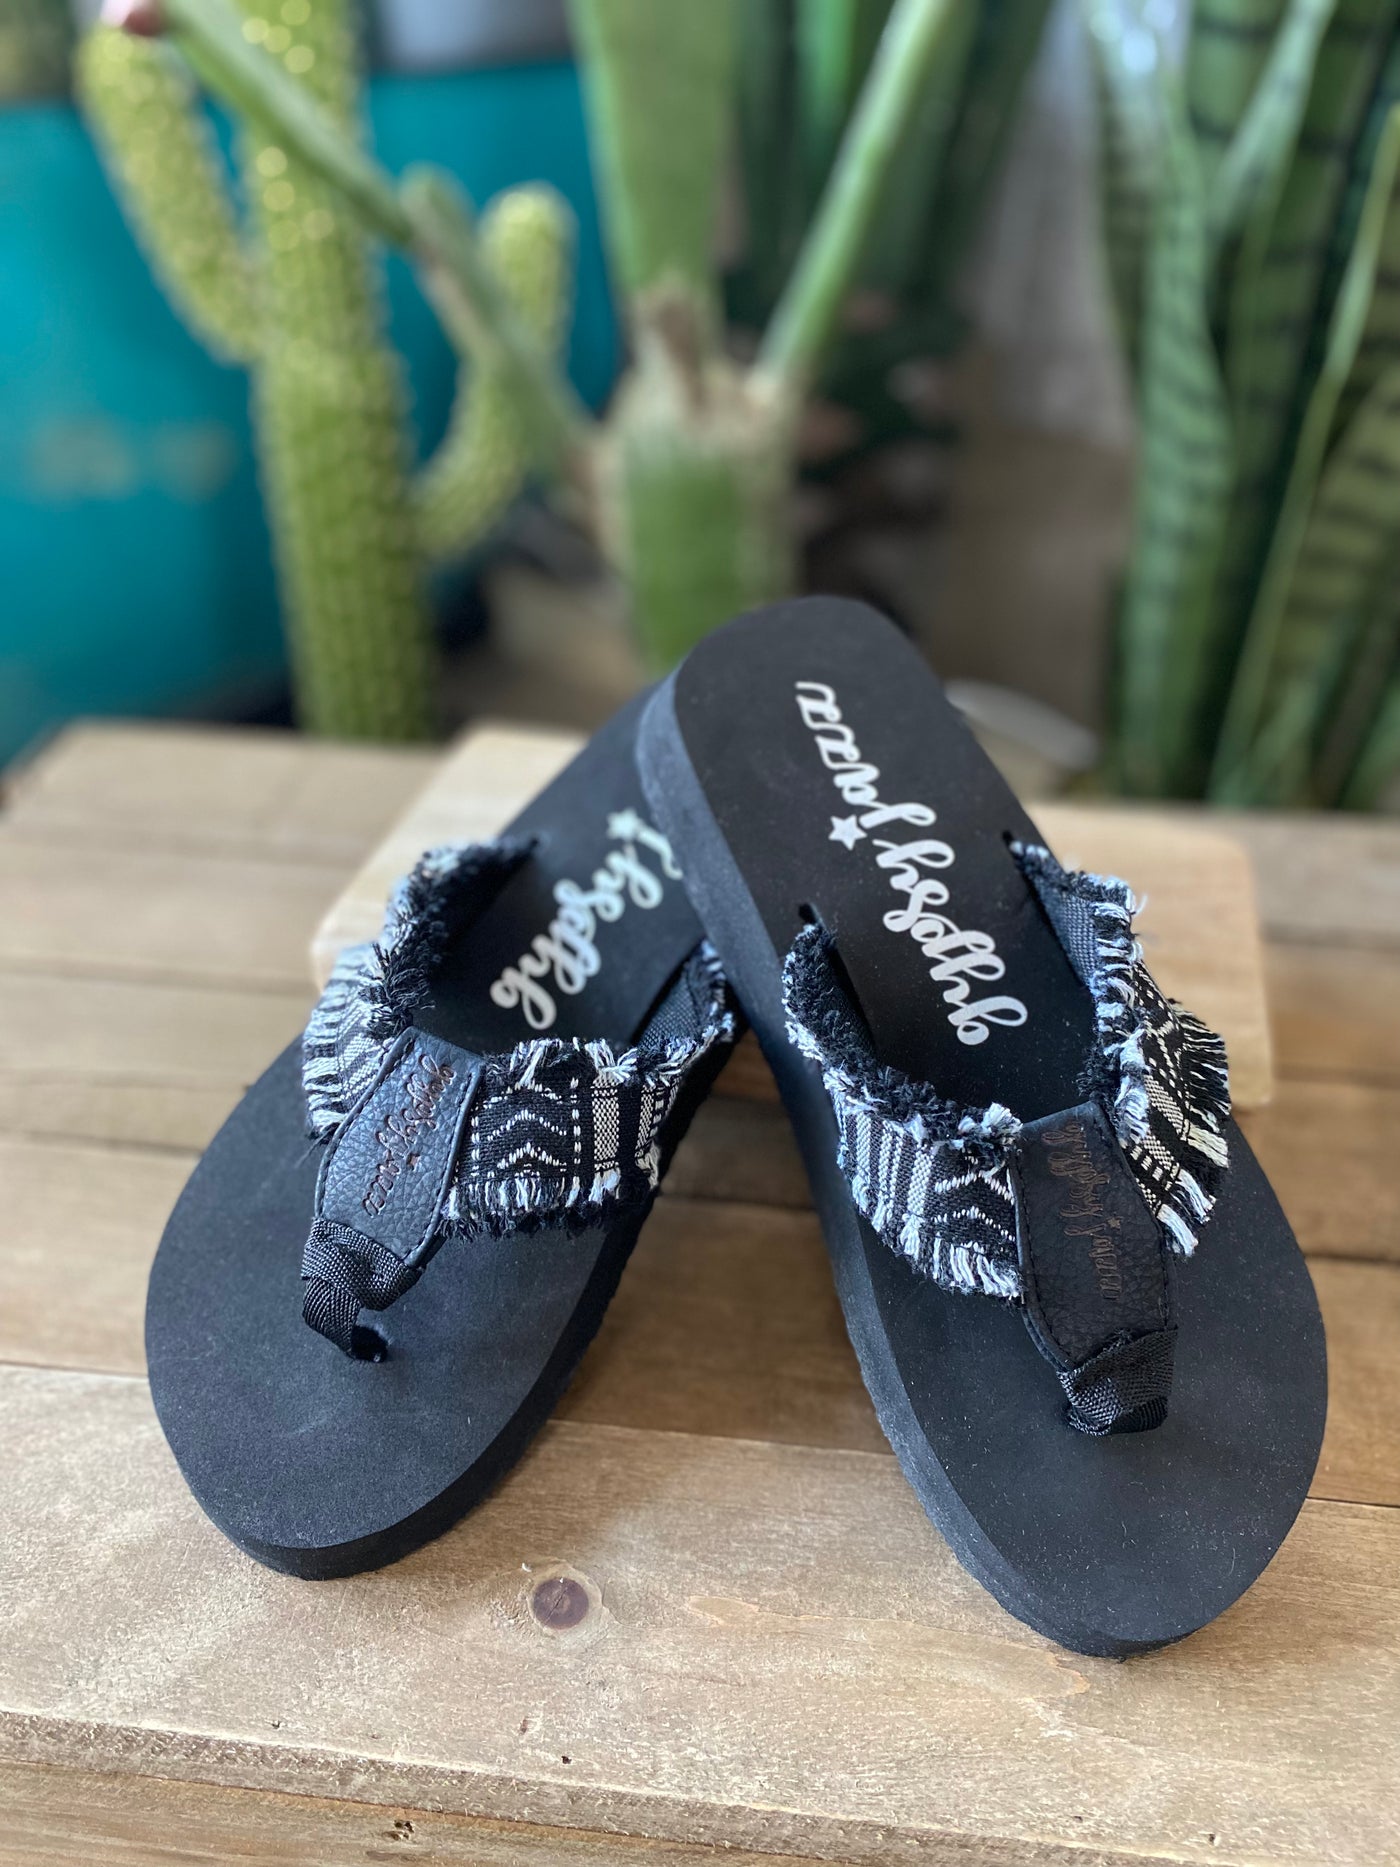 The Encore Aztec Black And White Gypsy Jazz Flip Flop